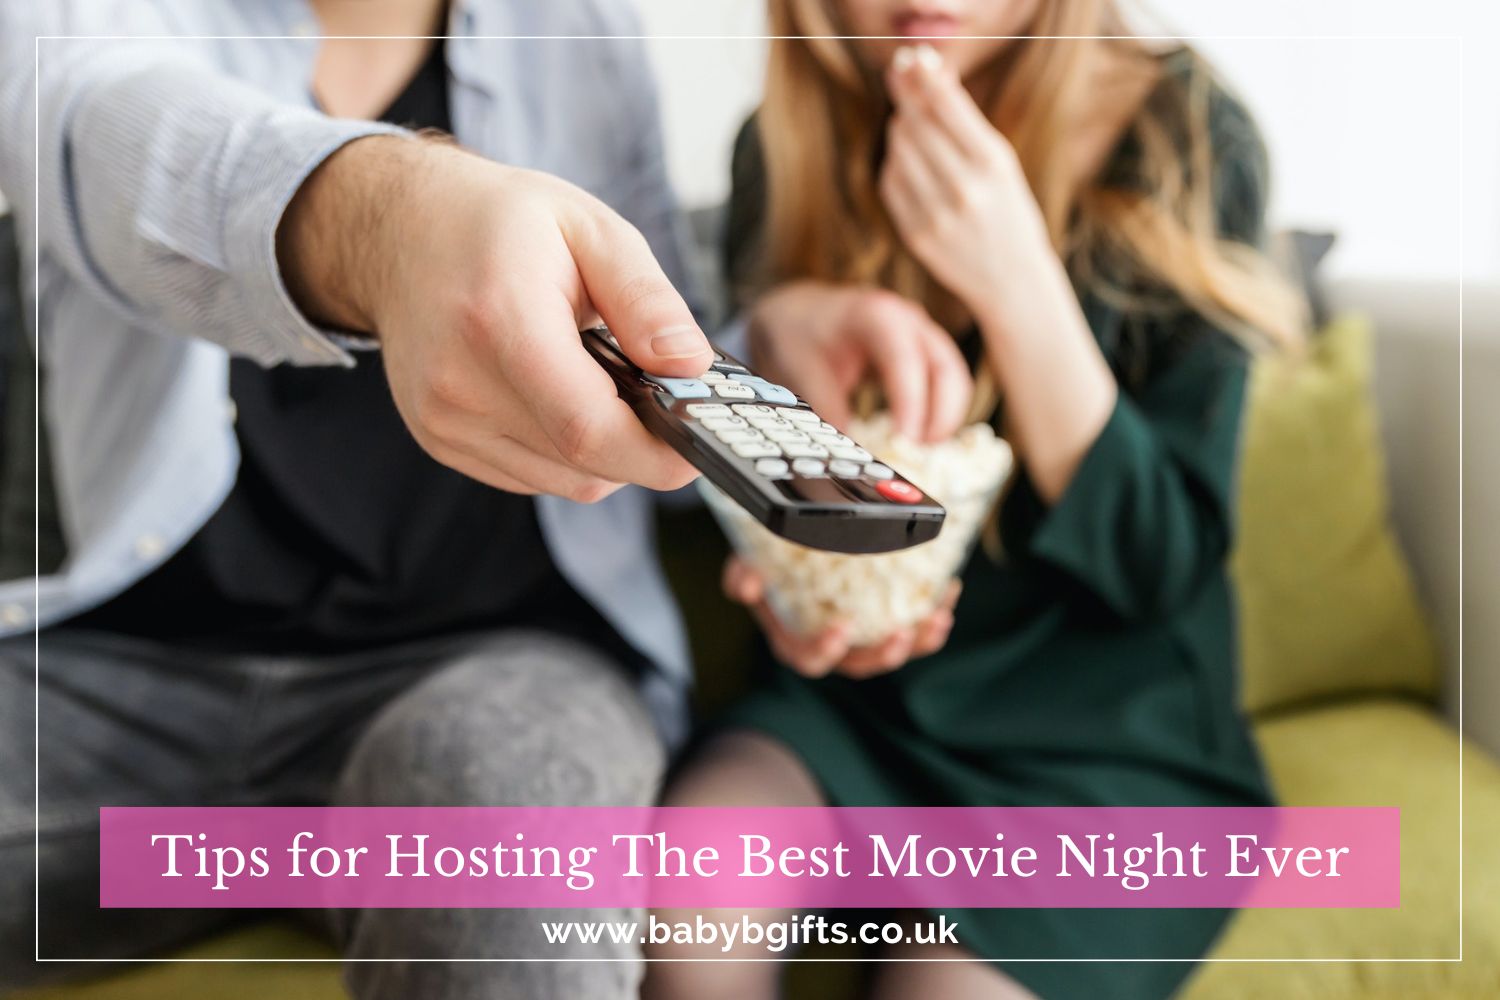 6 Tips for Hosting The Best Movie Night Ever